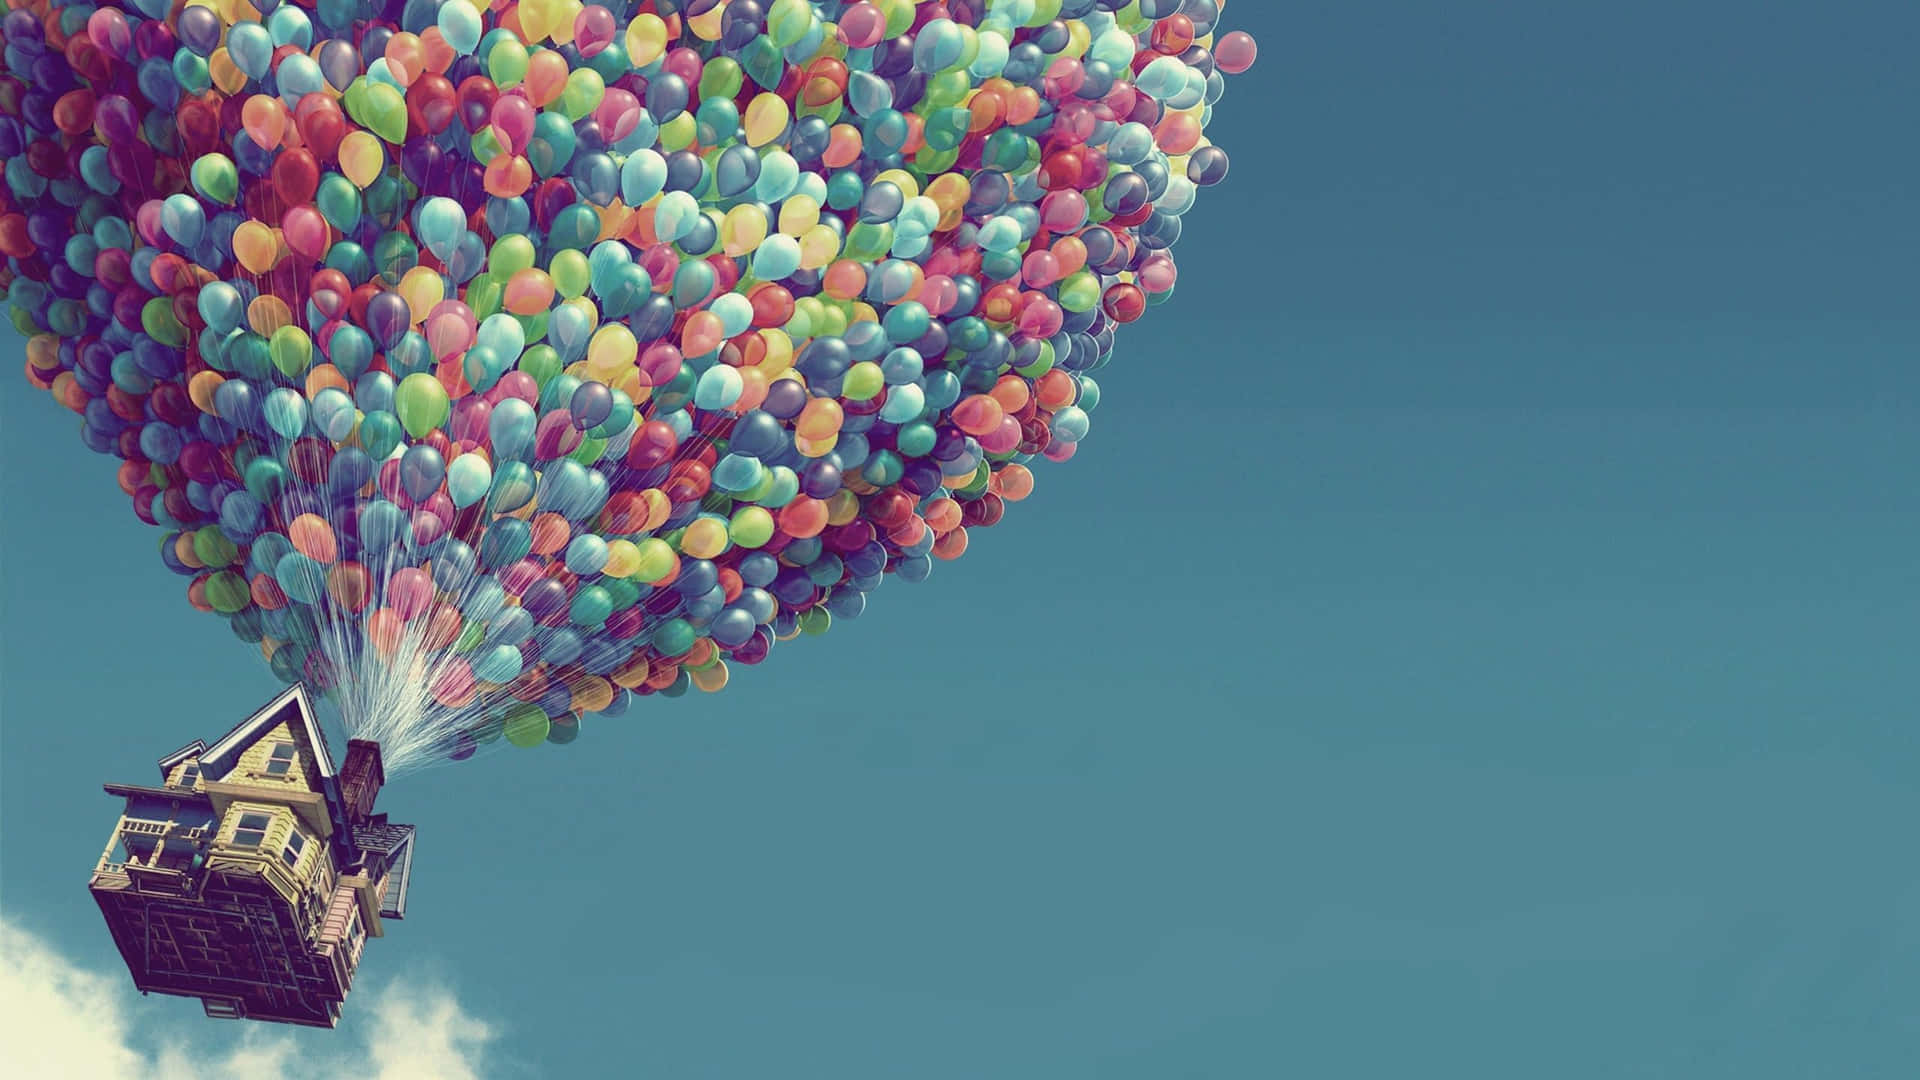 A House With Balloons Flying In The Sky Wallpaper